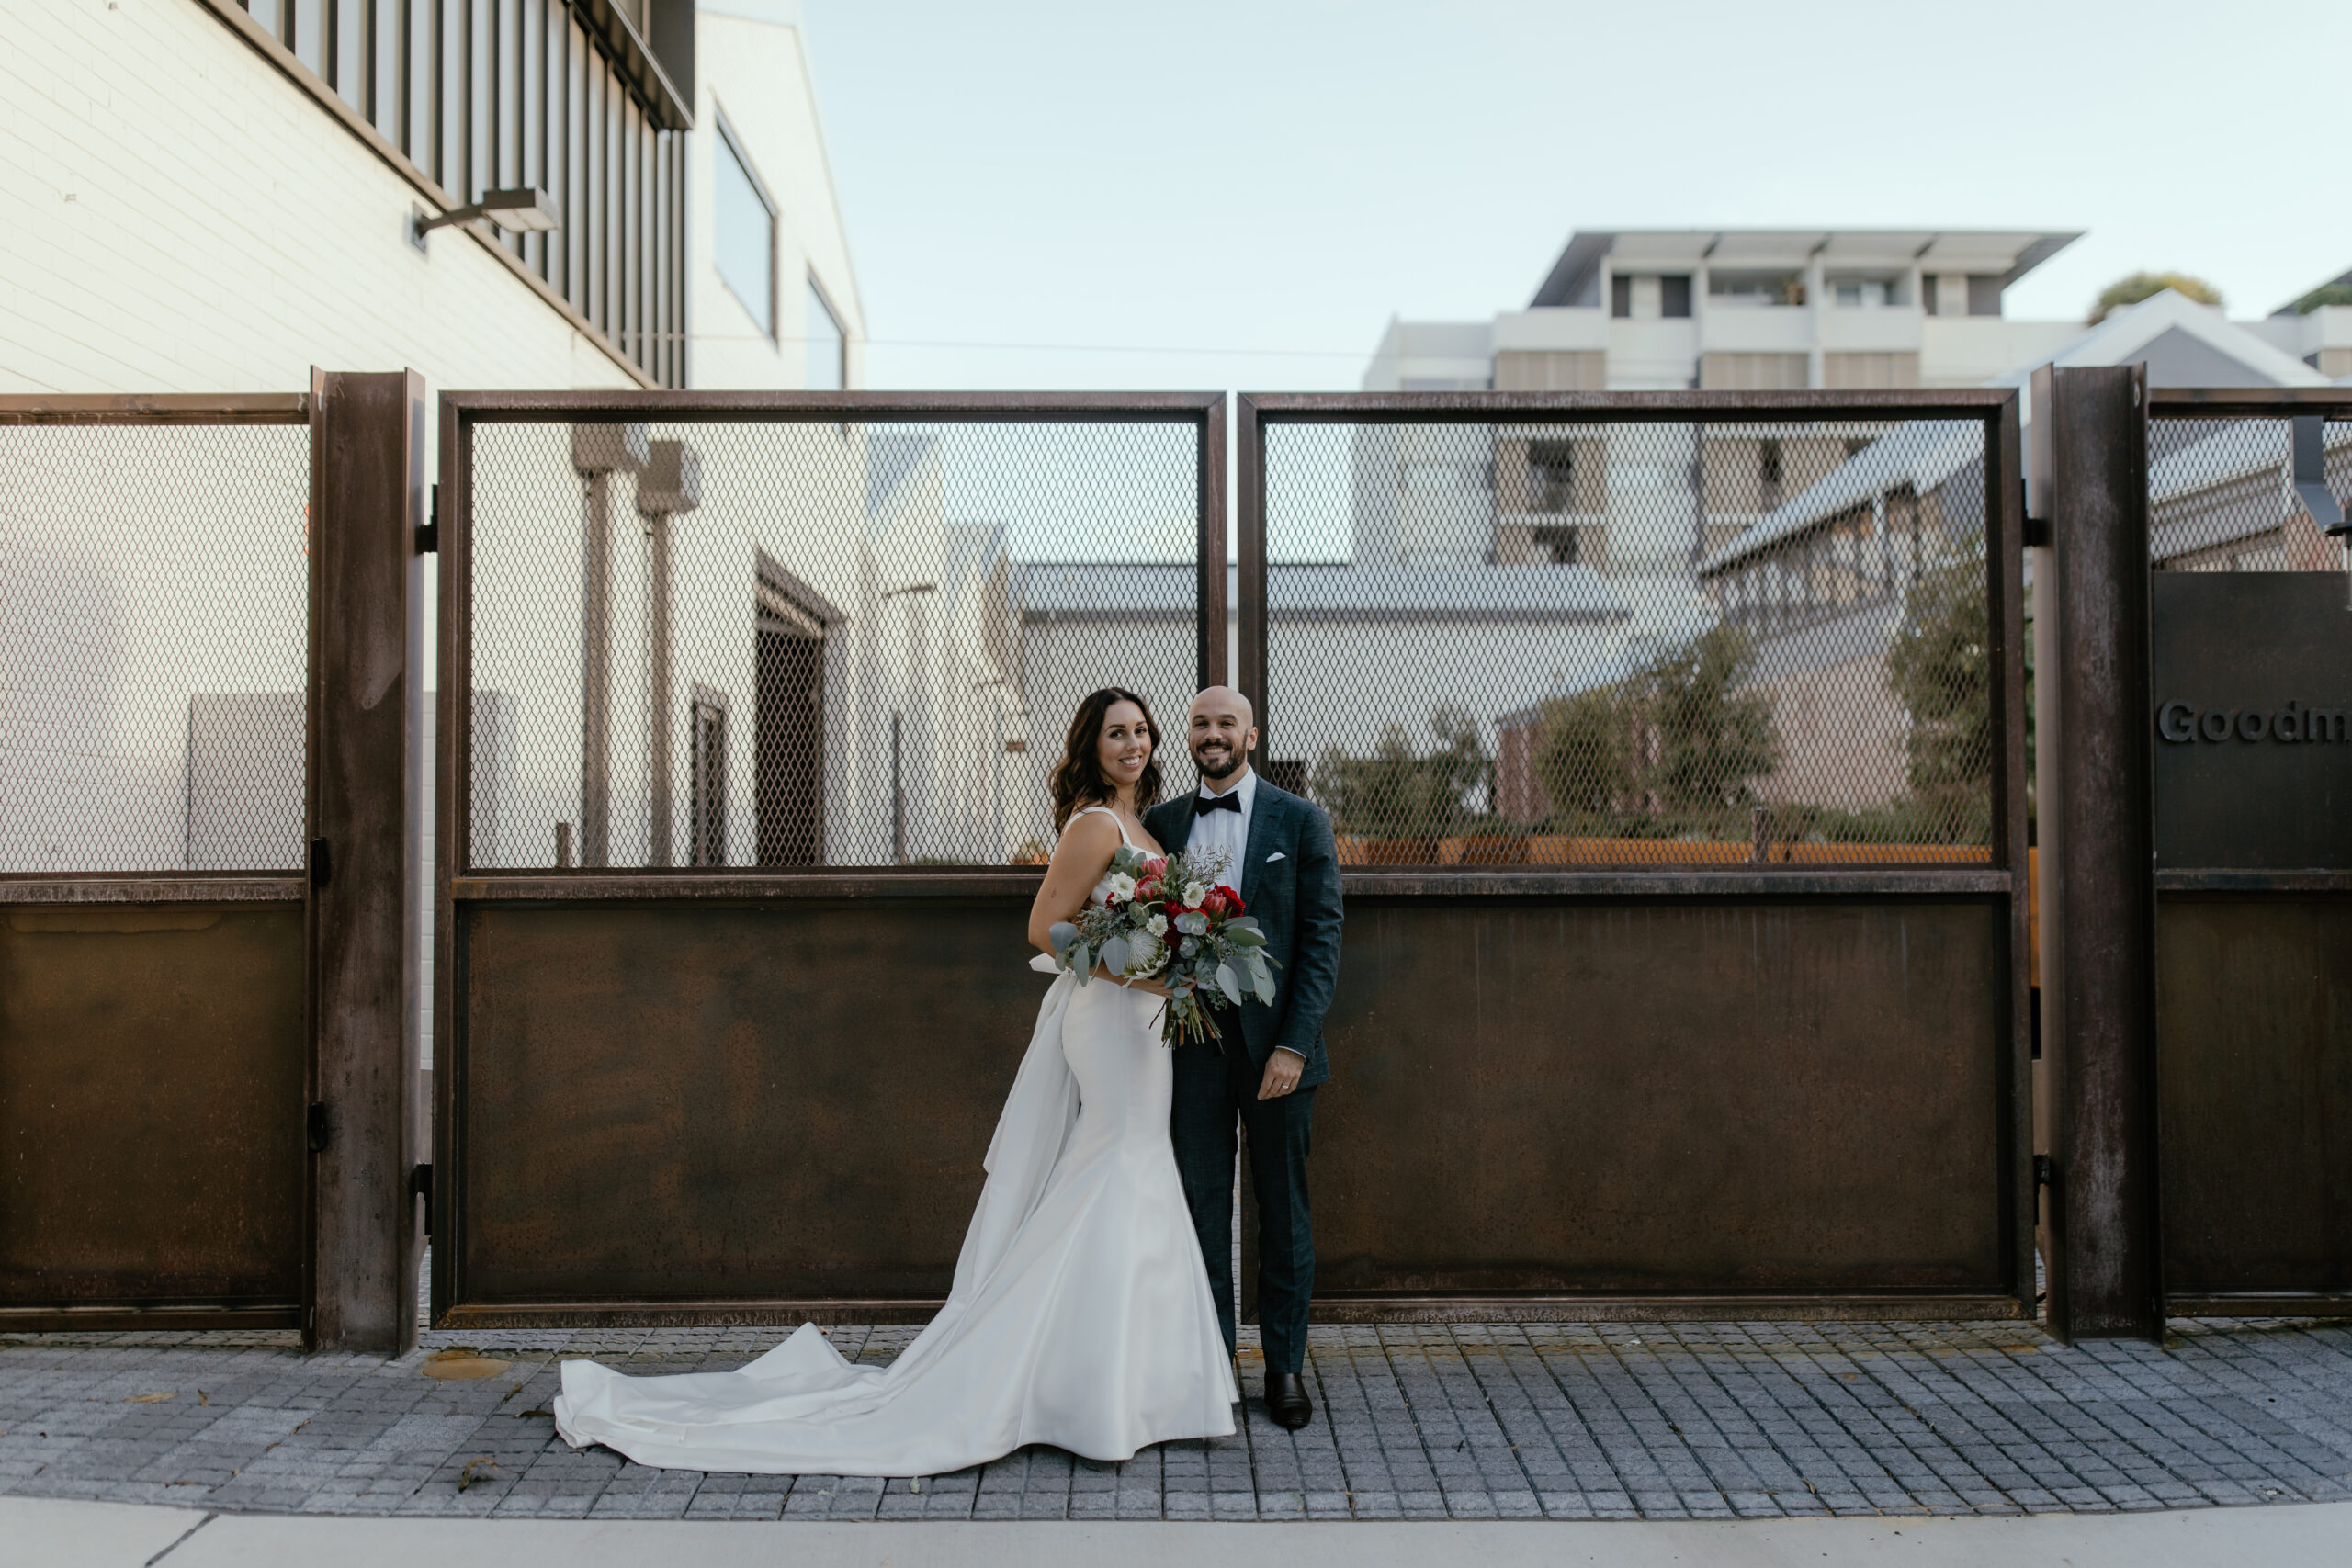 Check out this super unique and chic Sydney city wedding!